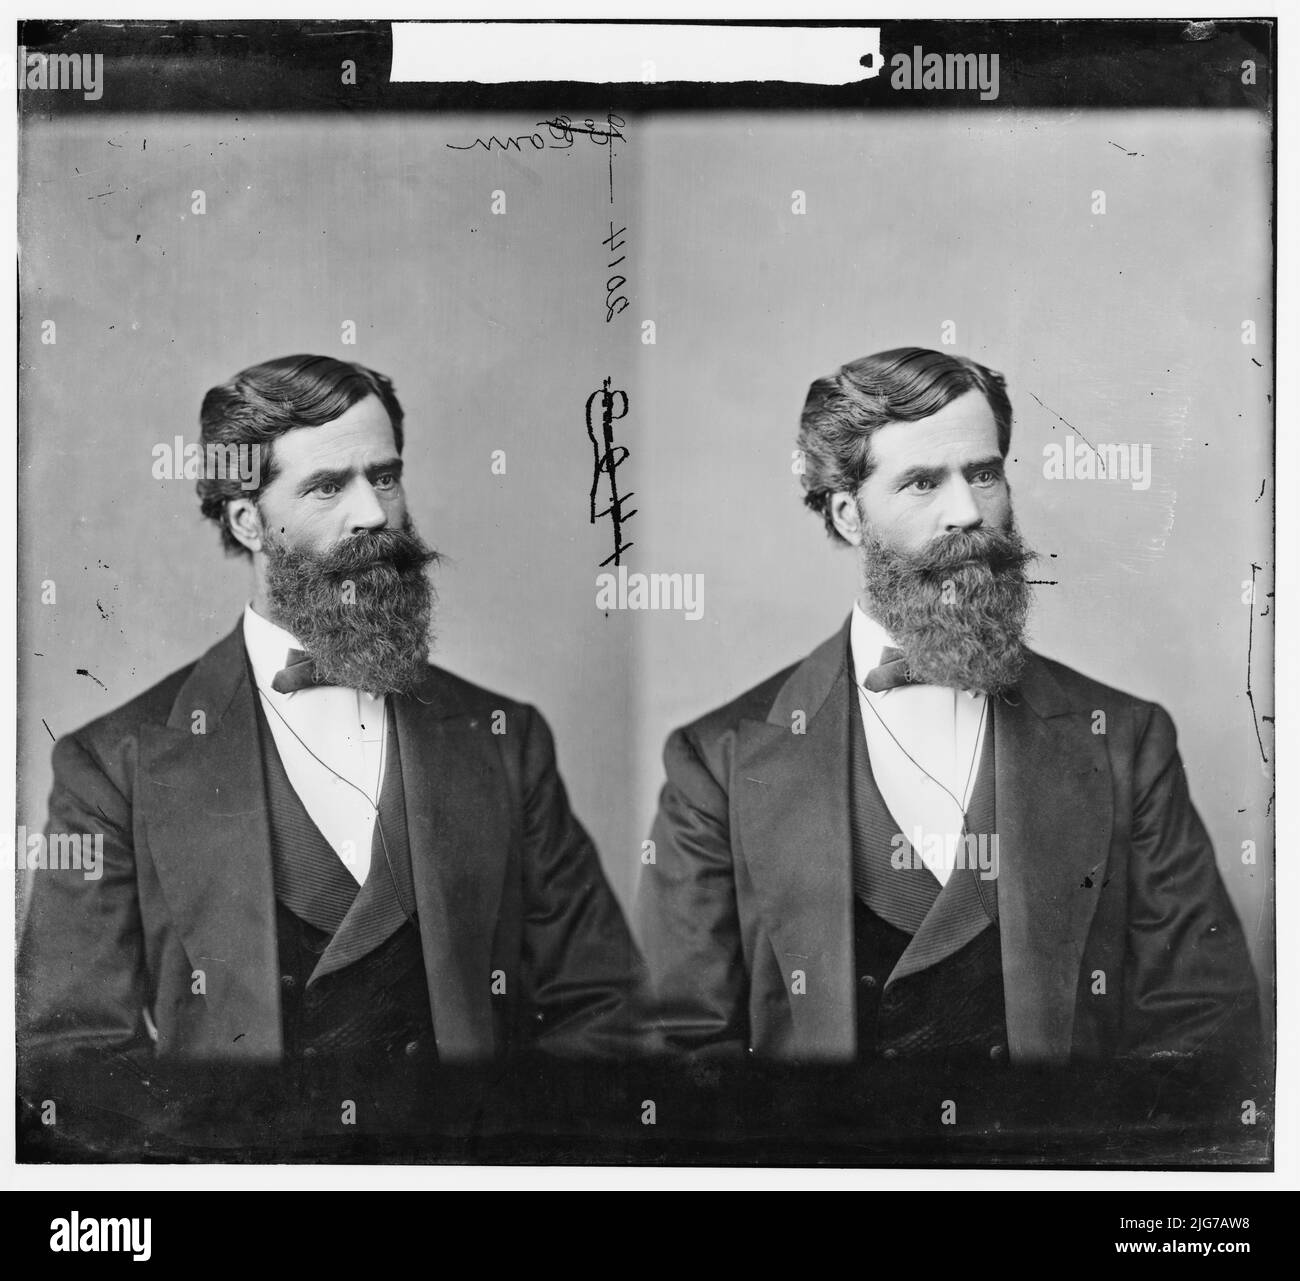 Thomas Montague Gunter, 1865-1880. Gunter, Hon. Thos. E., between 1865 and 1880. [Politician, lawyer and soldier: colonel of the Thirteenth Regiment, Arkansas Volunteers, Confederate States Army; involved with the forced settlement of Native American tribes, claimed that: &quot;The experiment has worked well. The Creeks, Cherokees, Choctaws, Chickasaws, and Seminoles settled in the Indian Territory are now classed as 'civilized tribes'&quot;]. Stock Photo